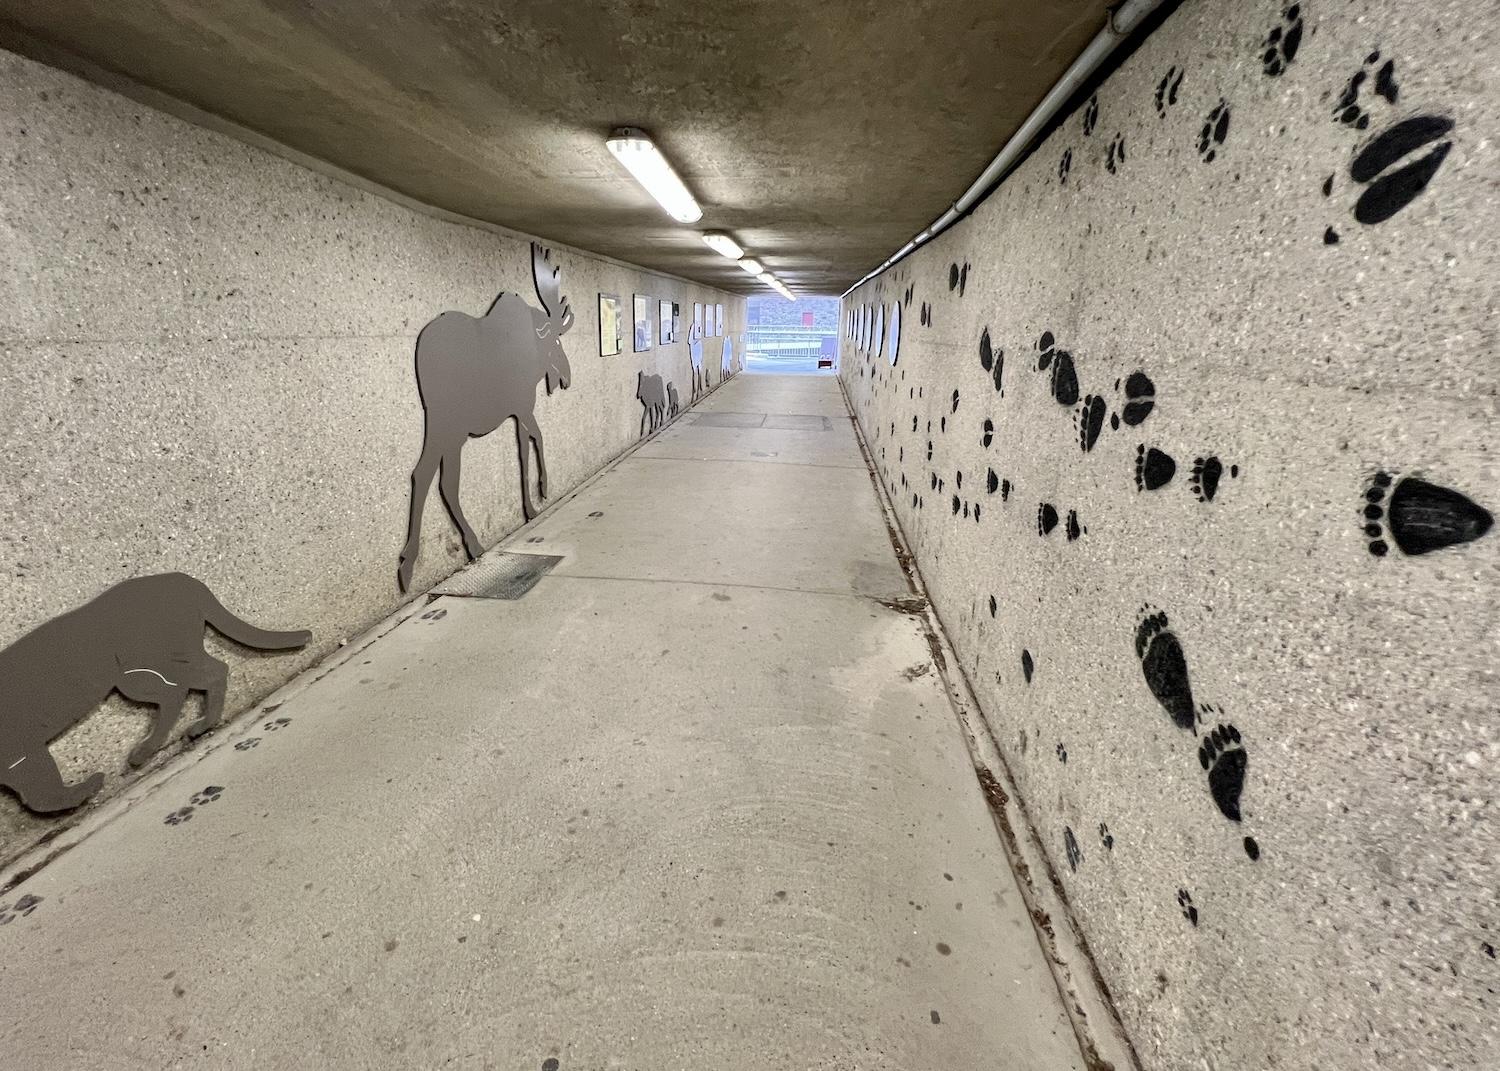 To cross the highway at Radium Hot Springs, Parks Canada installed a pedestrian underpass that tells the story of wildlife overpasses and underpasses.